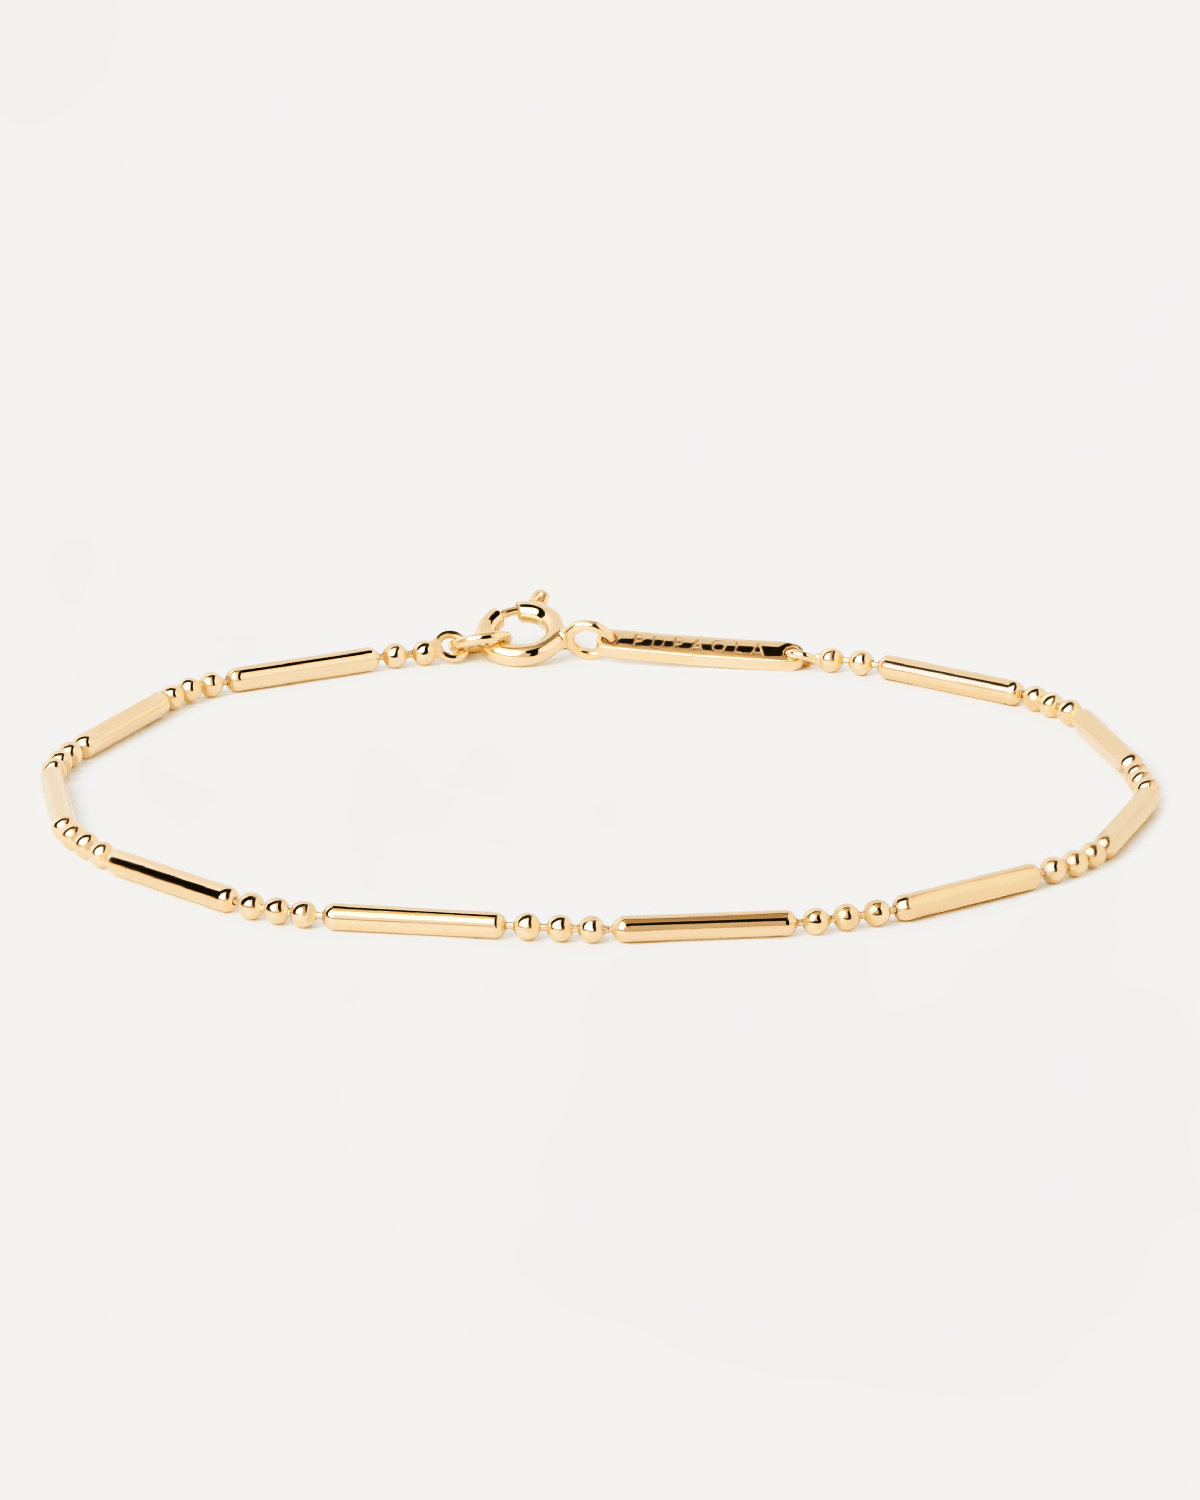 2023 Selection | Valeria Bracelet. Ball and bar textured bracelet in gold-plated silver. Get the latest arrival from PDPAOLA. Place your order safely and get this Best Seller. Free Shipping.